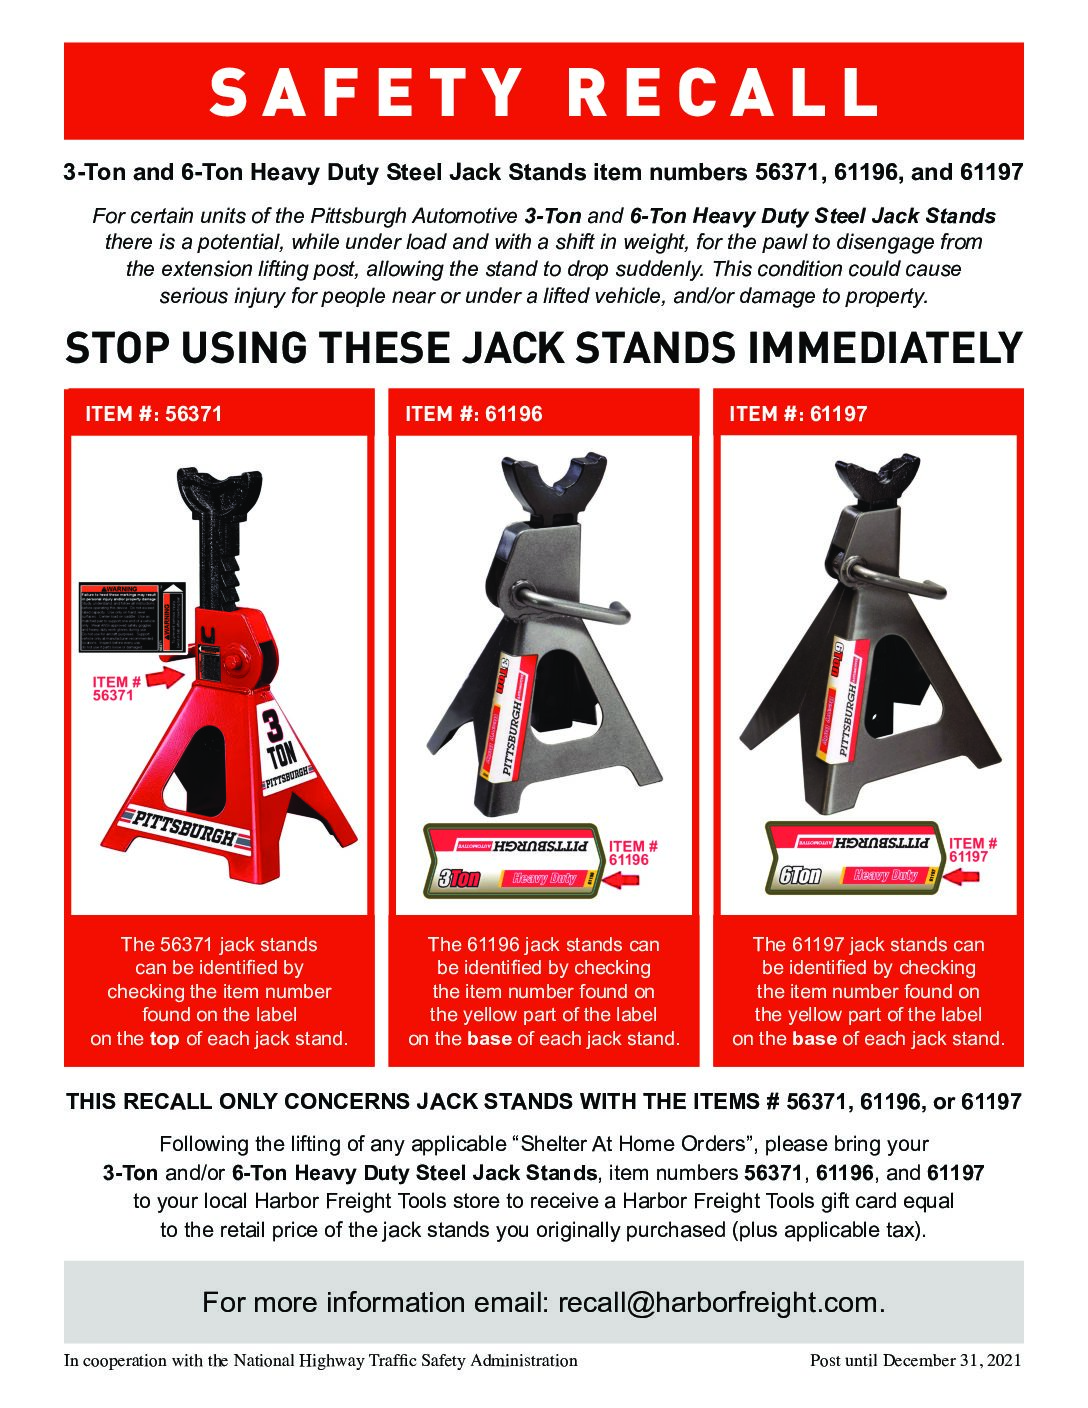 Shockingly, Almost 2 Million Jack Stands Recalled by Harbor Freight Tools,  Inc. - Wolf Tribune